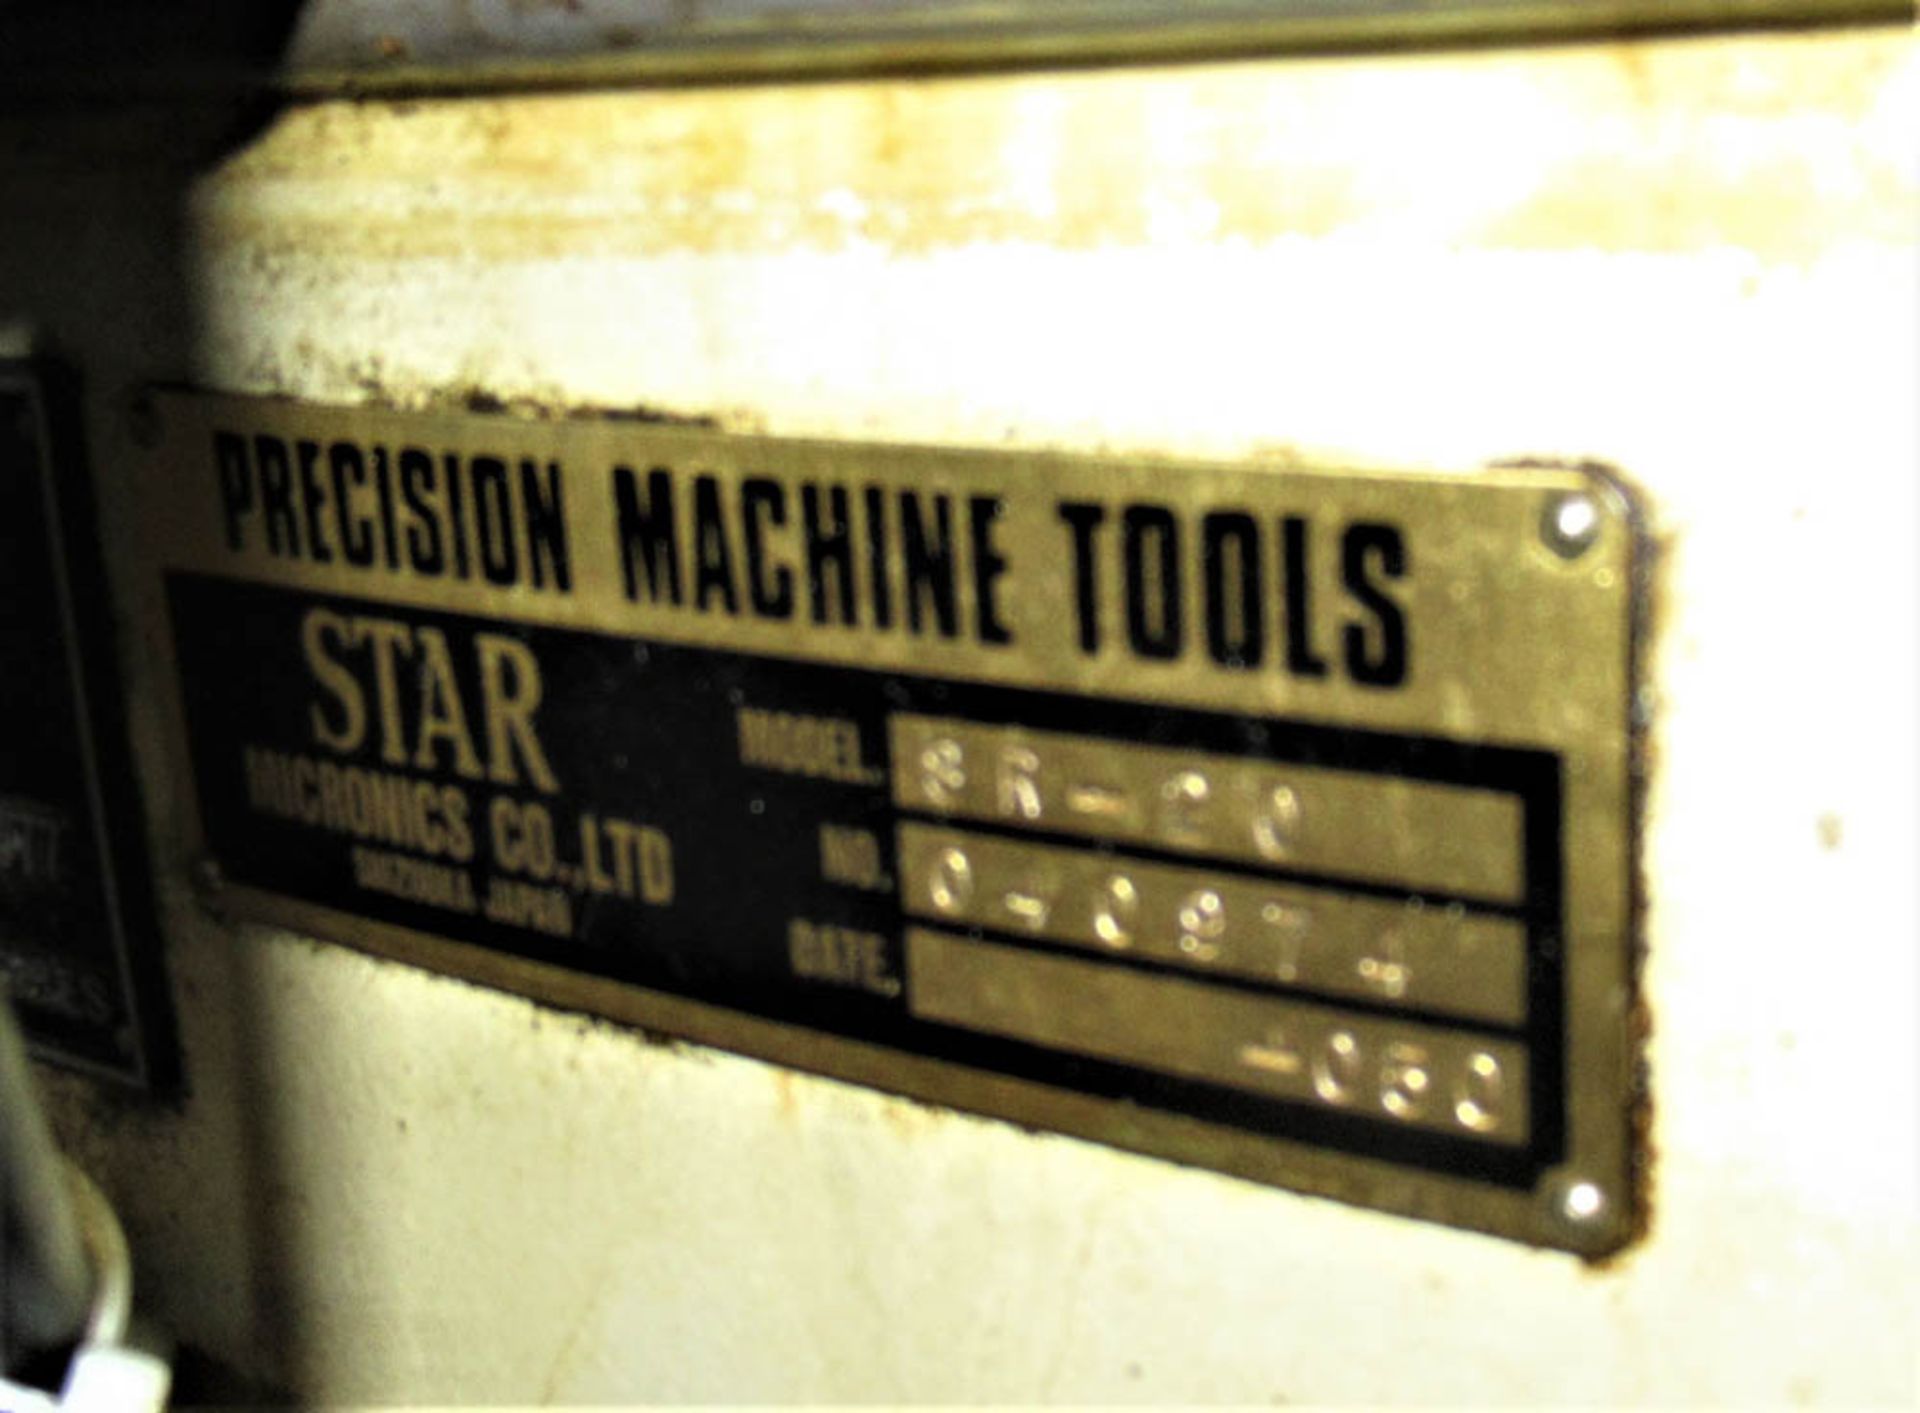 20MM STAR MDL. SR-20 SWISS TYPE CNC LATHE, 15/16" SPINDLE BORE, 8" MAX HEAD STROKE, 8000 RPM, 3/5HP, - Image 2 of 10